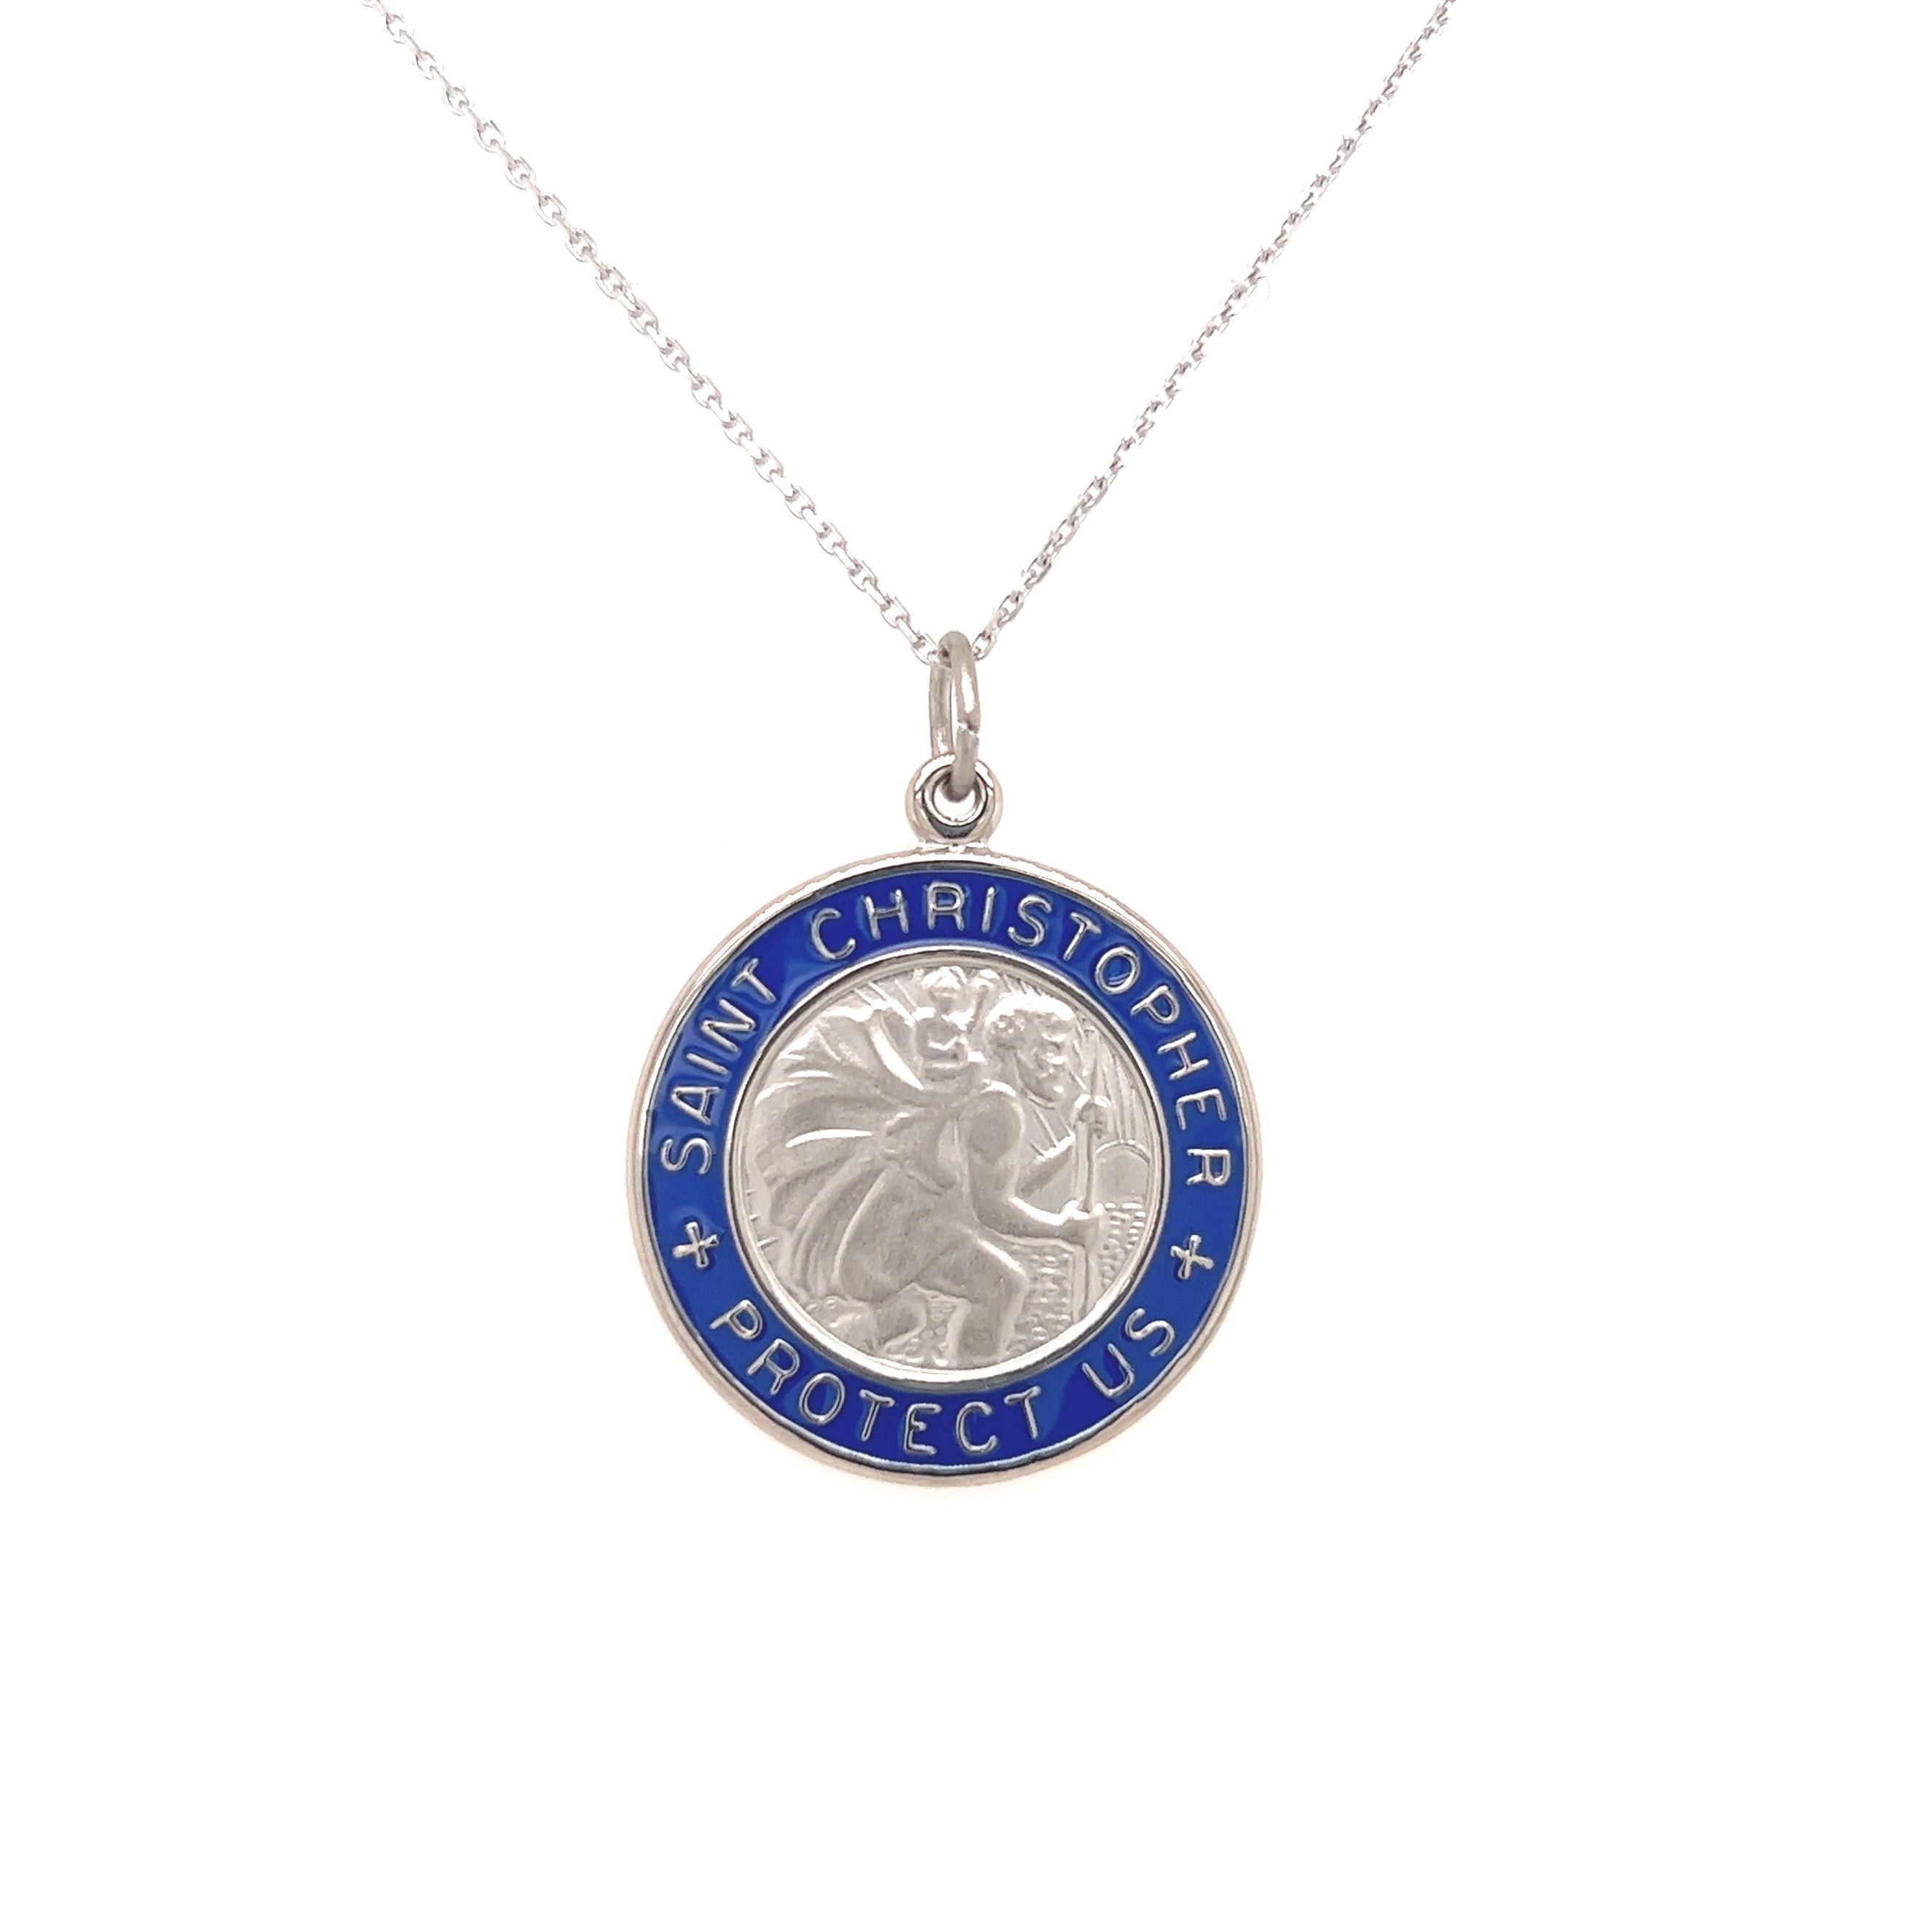 Amazon.com: Creed Silver Tone St. Christopher Protect Us Medal,  Rhodium-Plated Chain, 24-Inch : Arts, Crafts & Sewing